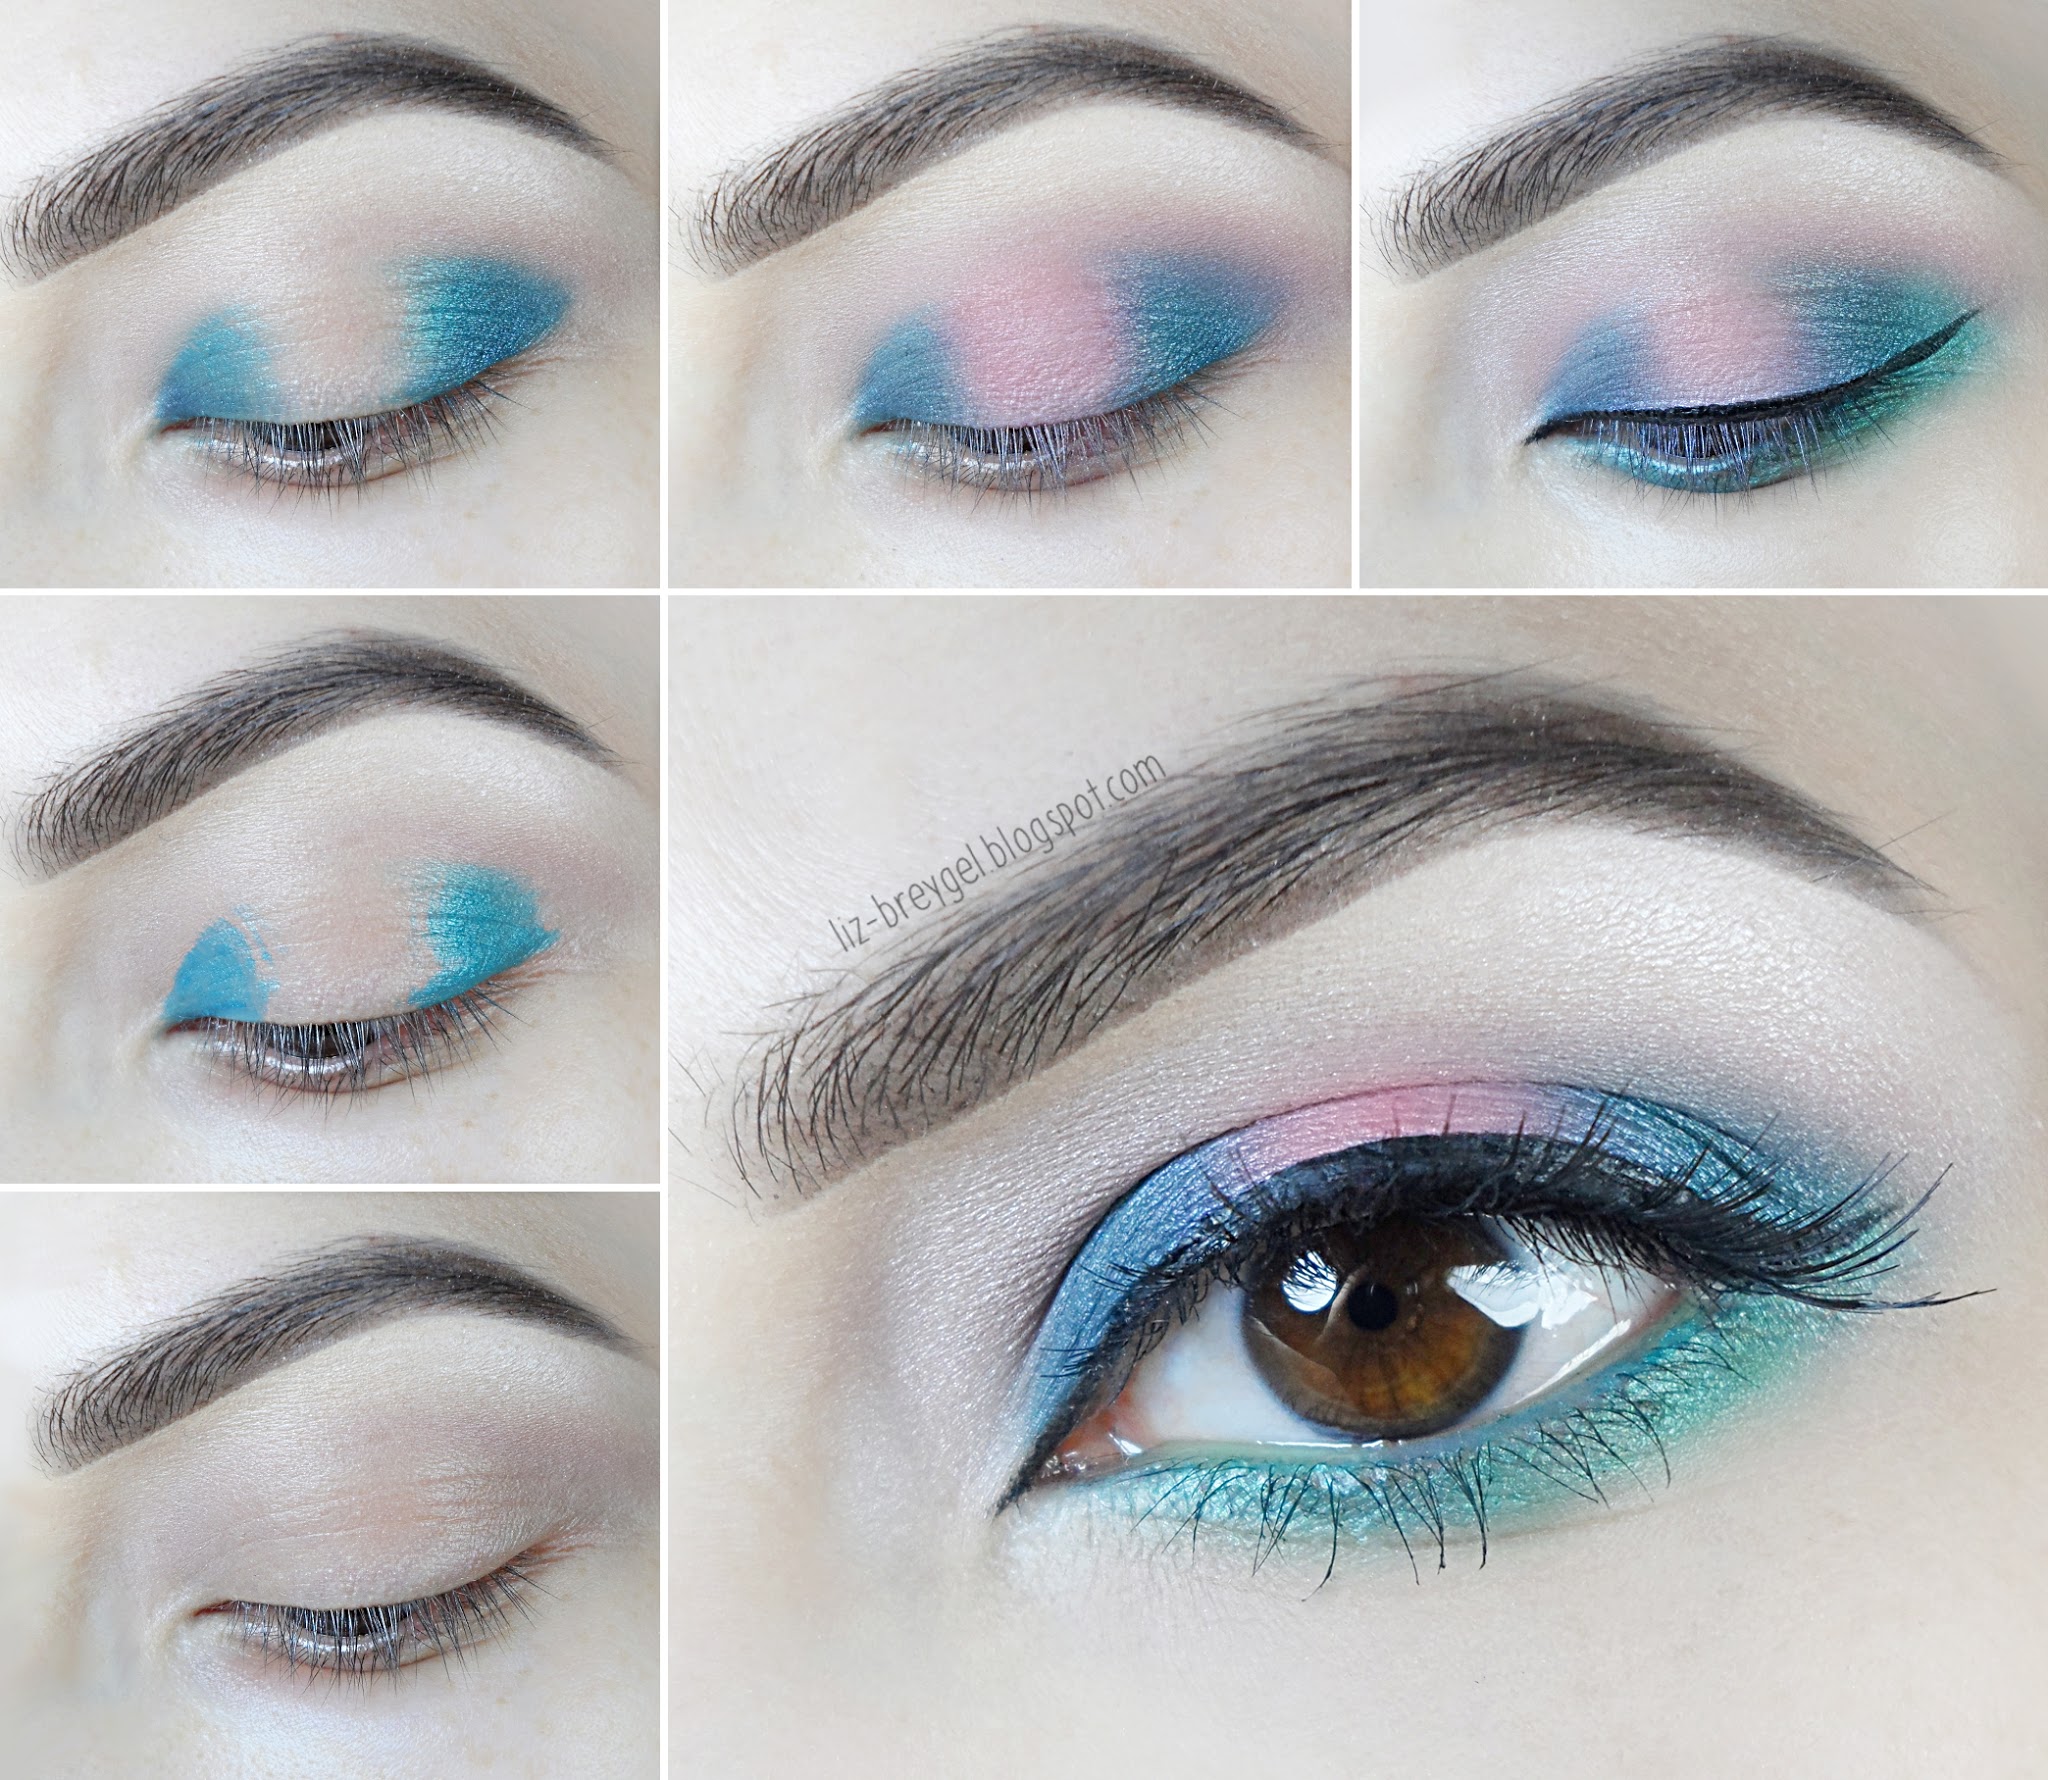 a step-by-step pictorial that shows how to do a blue, pink and green eye makeup inspired by alexandrite stone